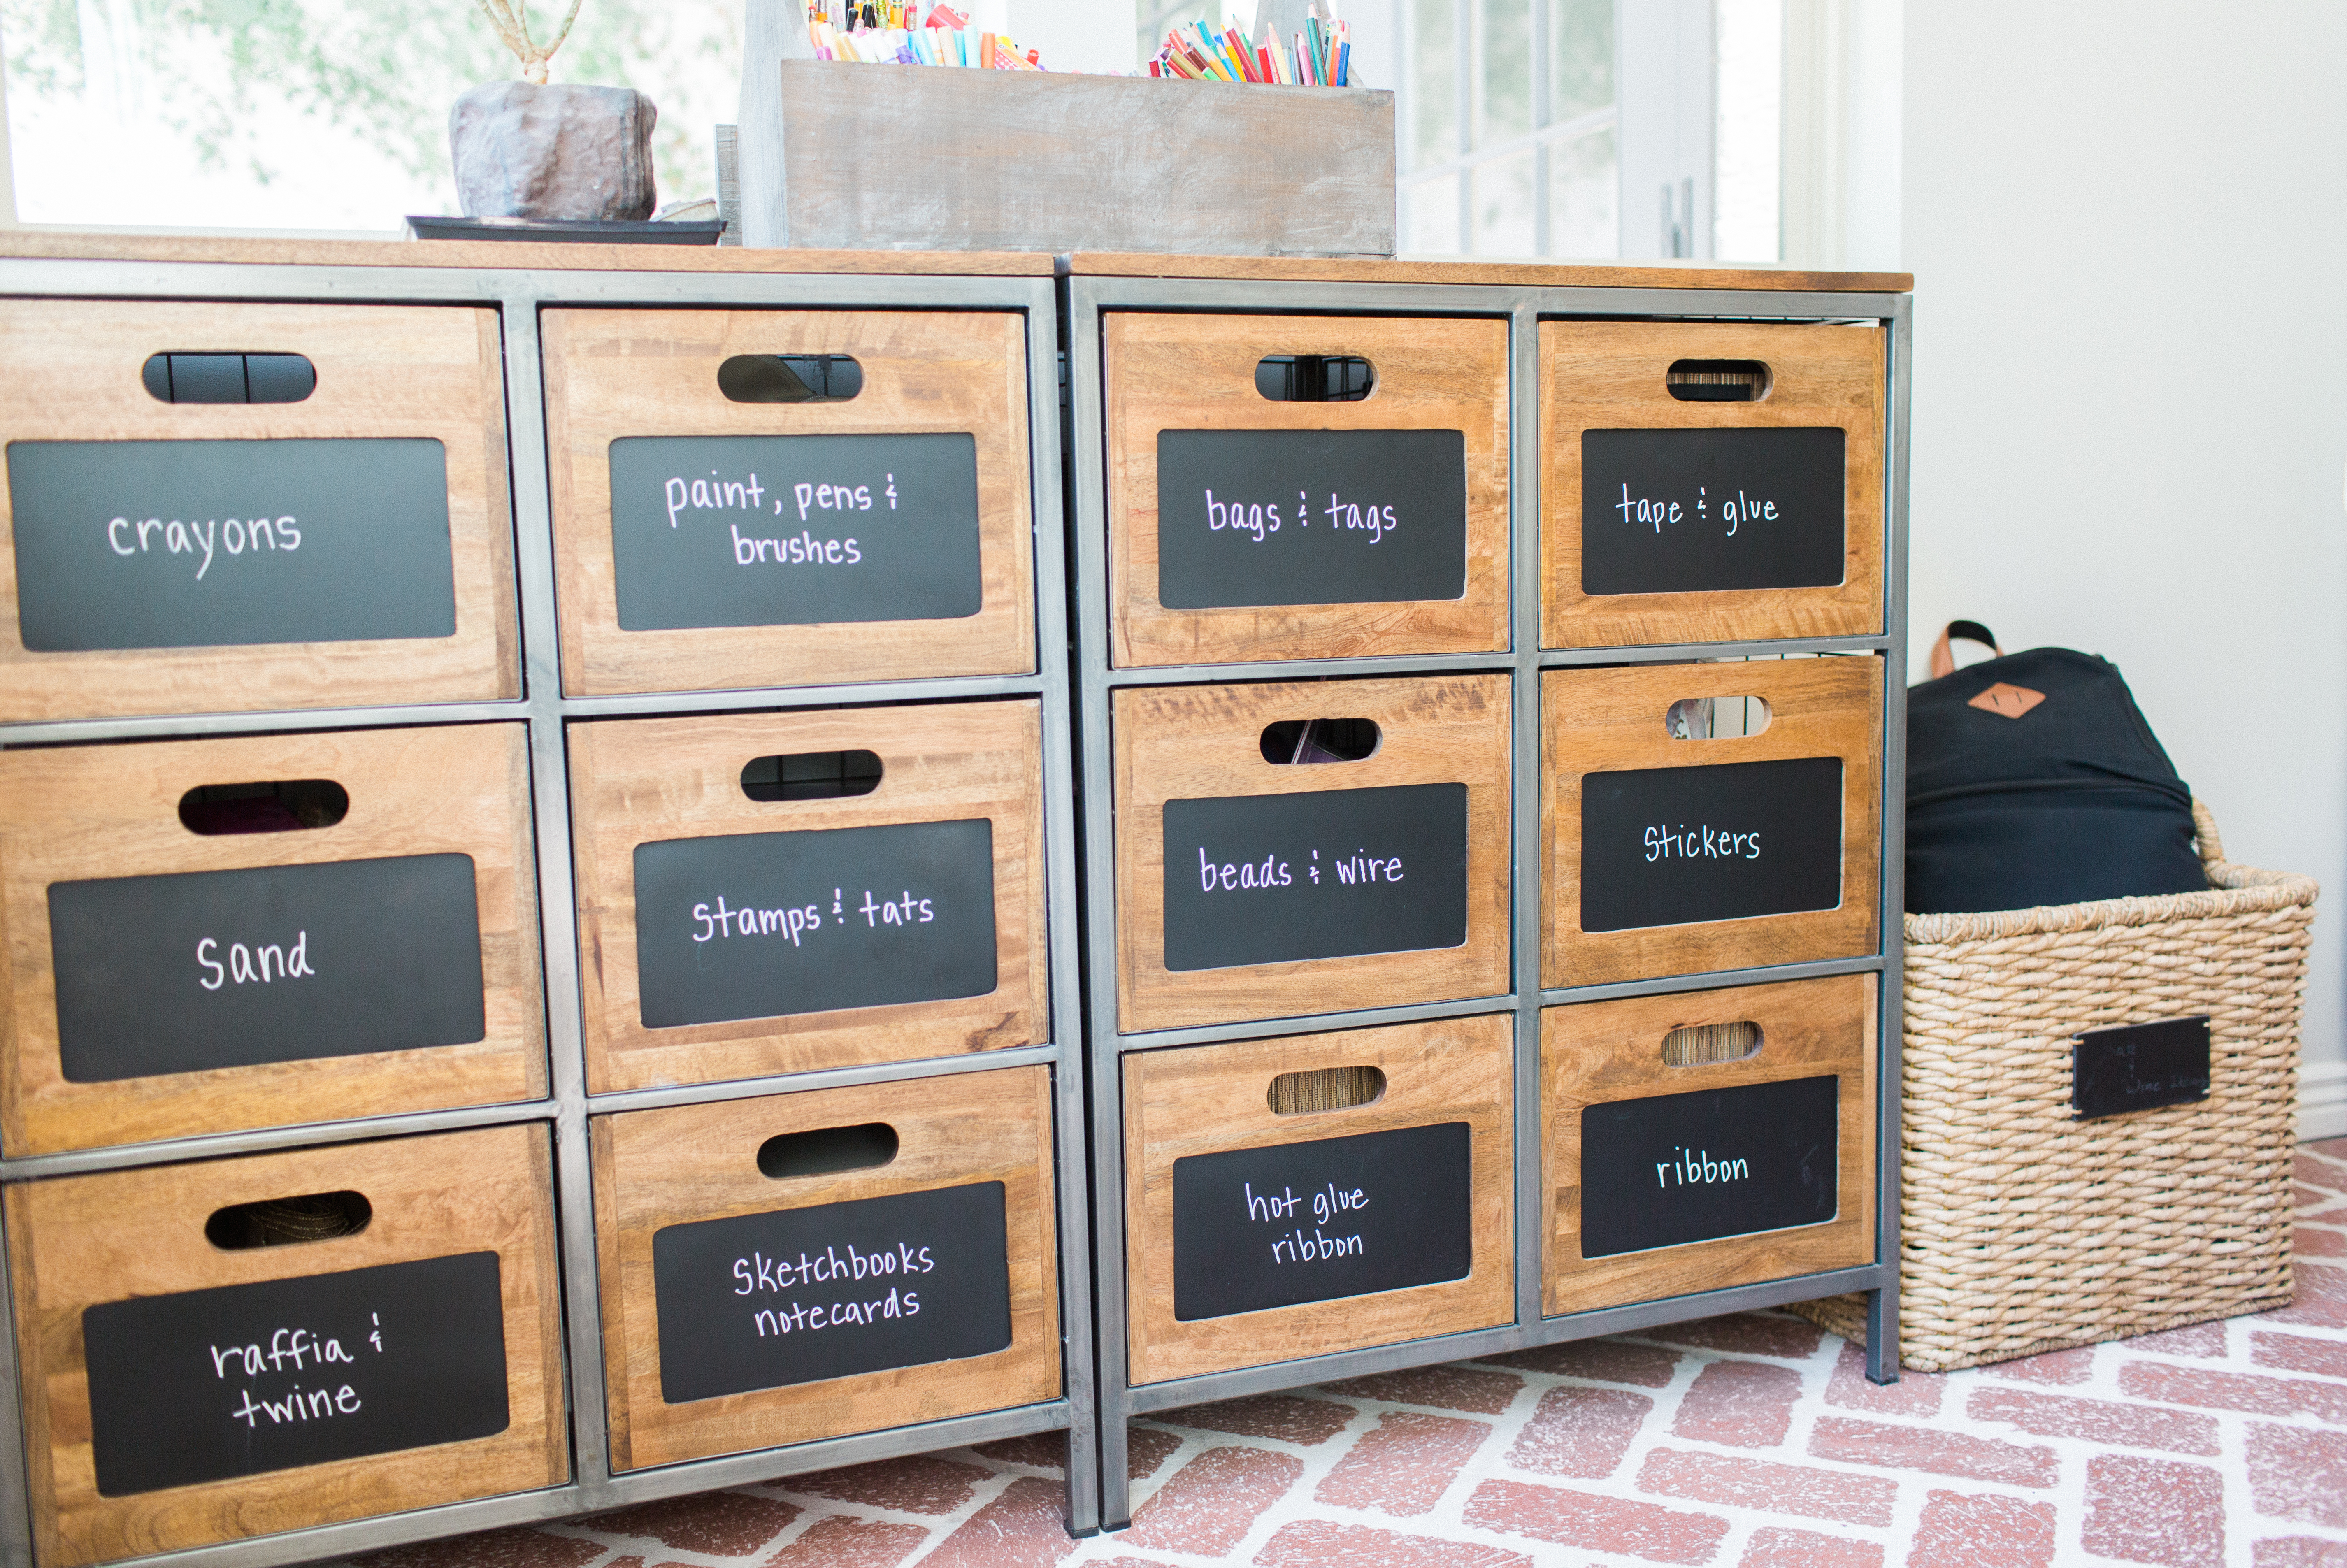 7 Great Organization Products and Ideas to Simplify your Life